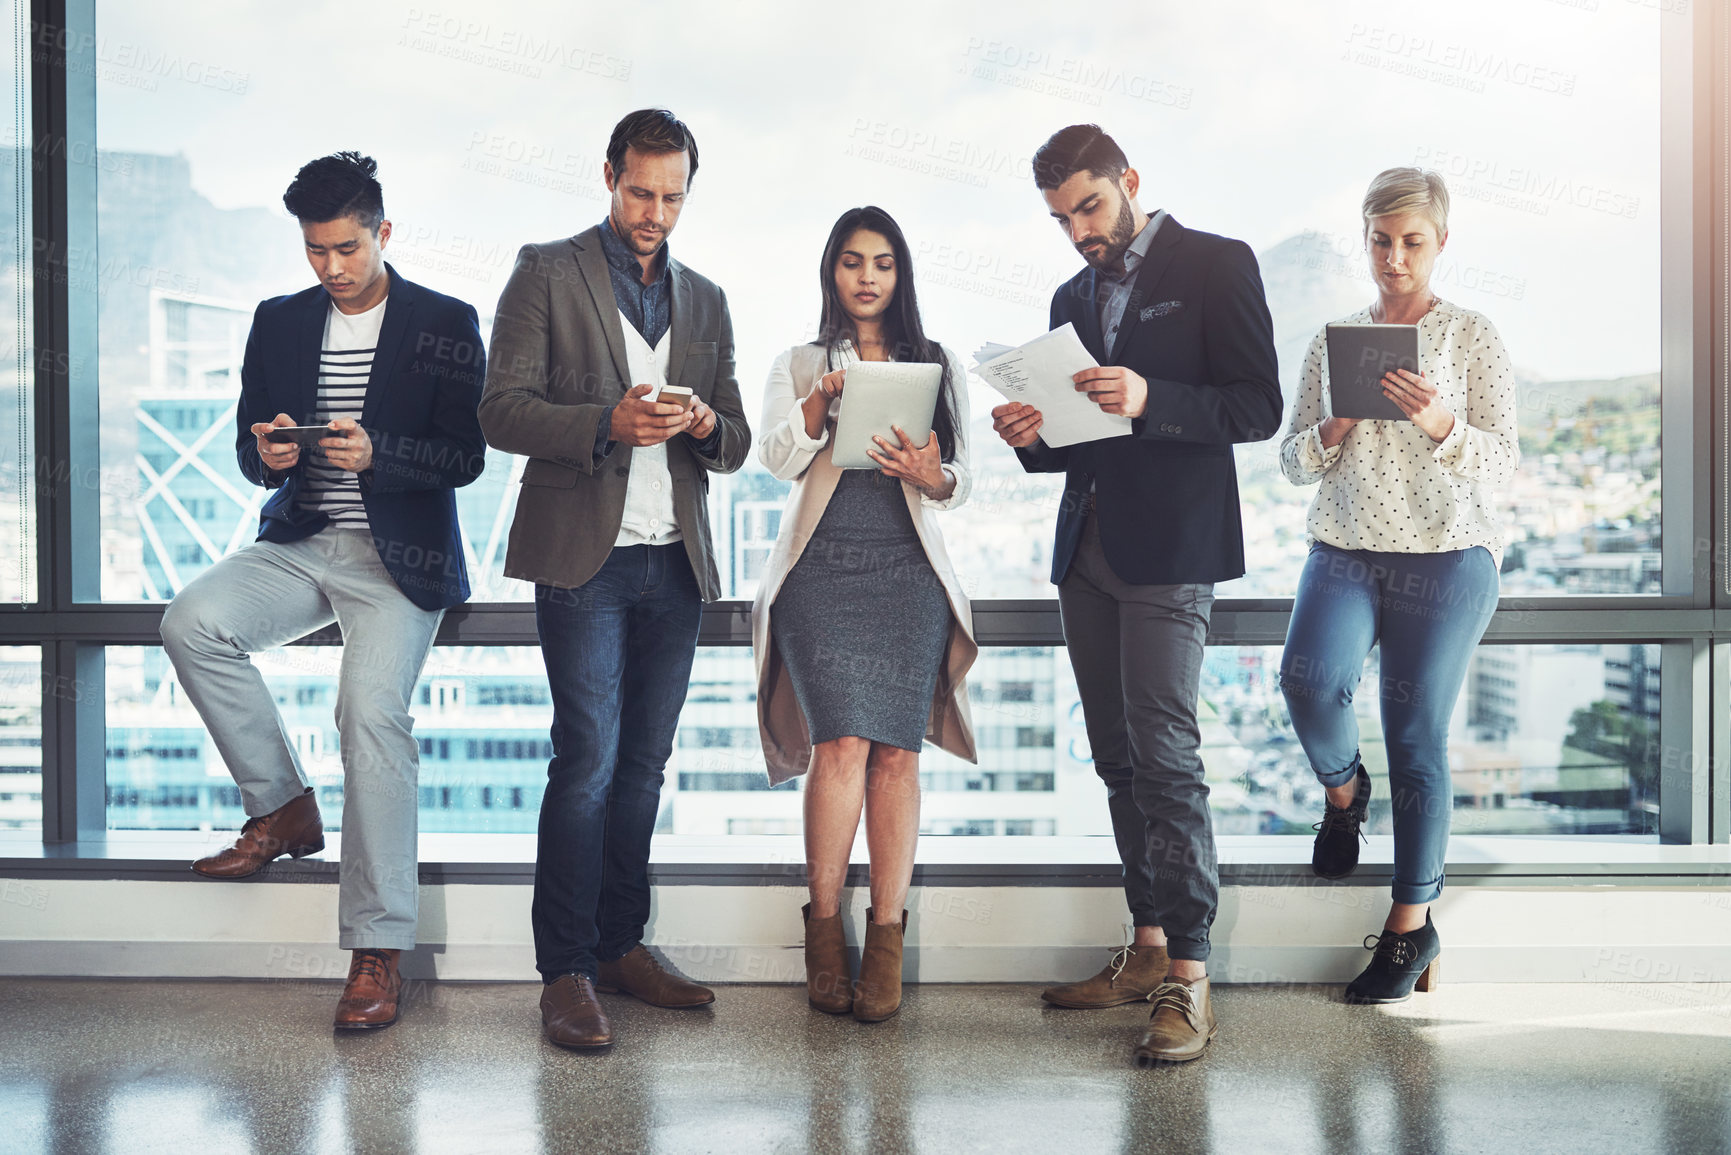 Buy stock photo Shot of a diverse group of businesspeople using wireless technology in an office